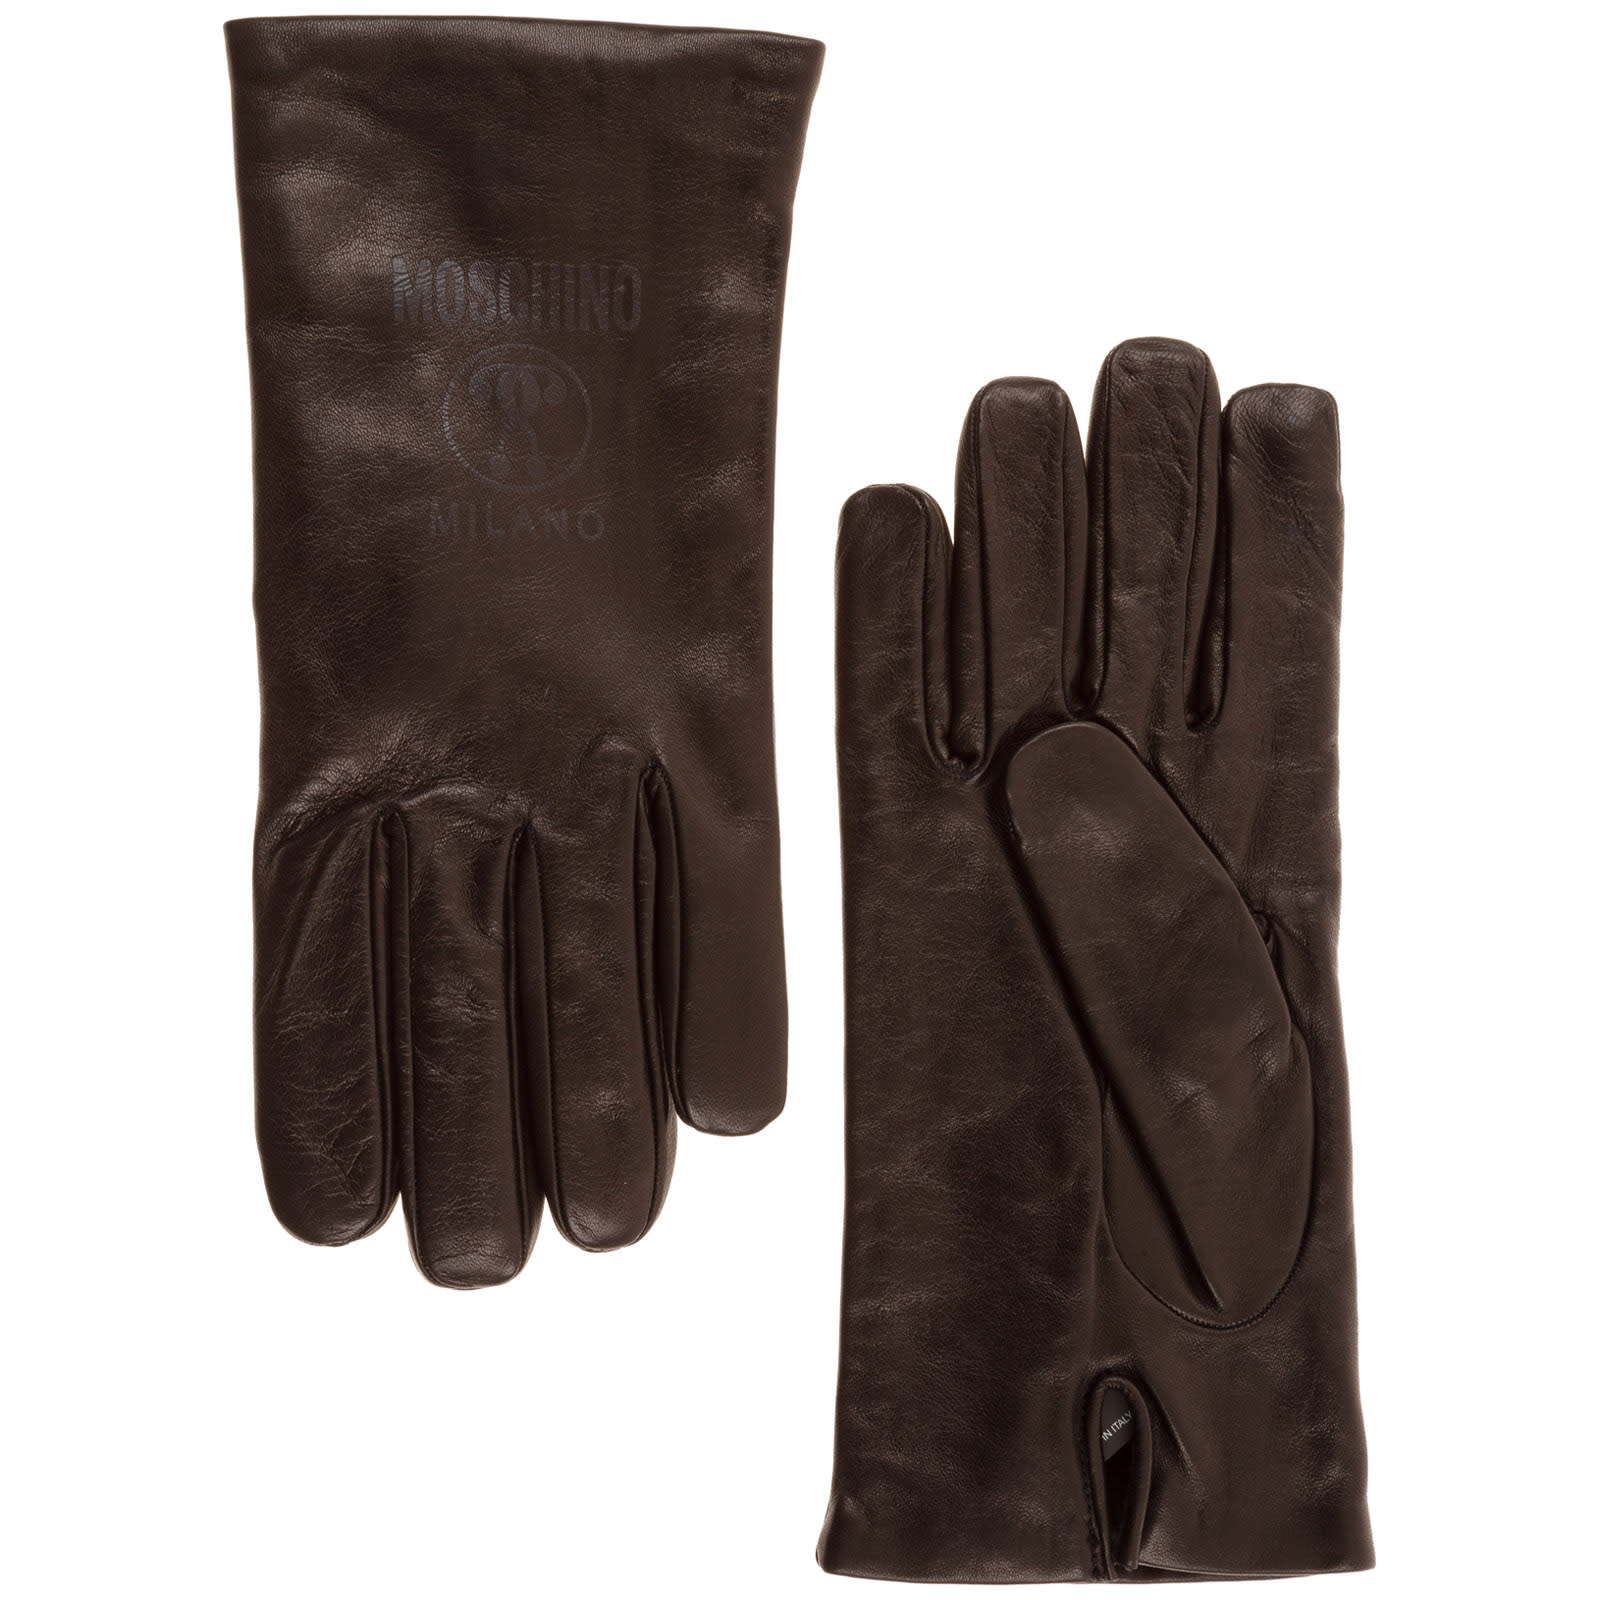 MOSCHINO MOSCHINO DOUBLE QUESTION MARK GLOVES,M547060071016